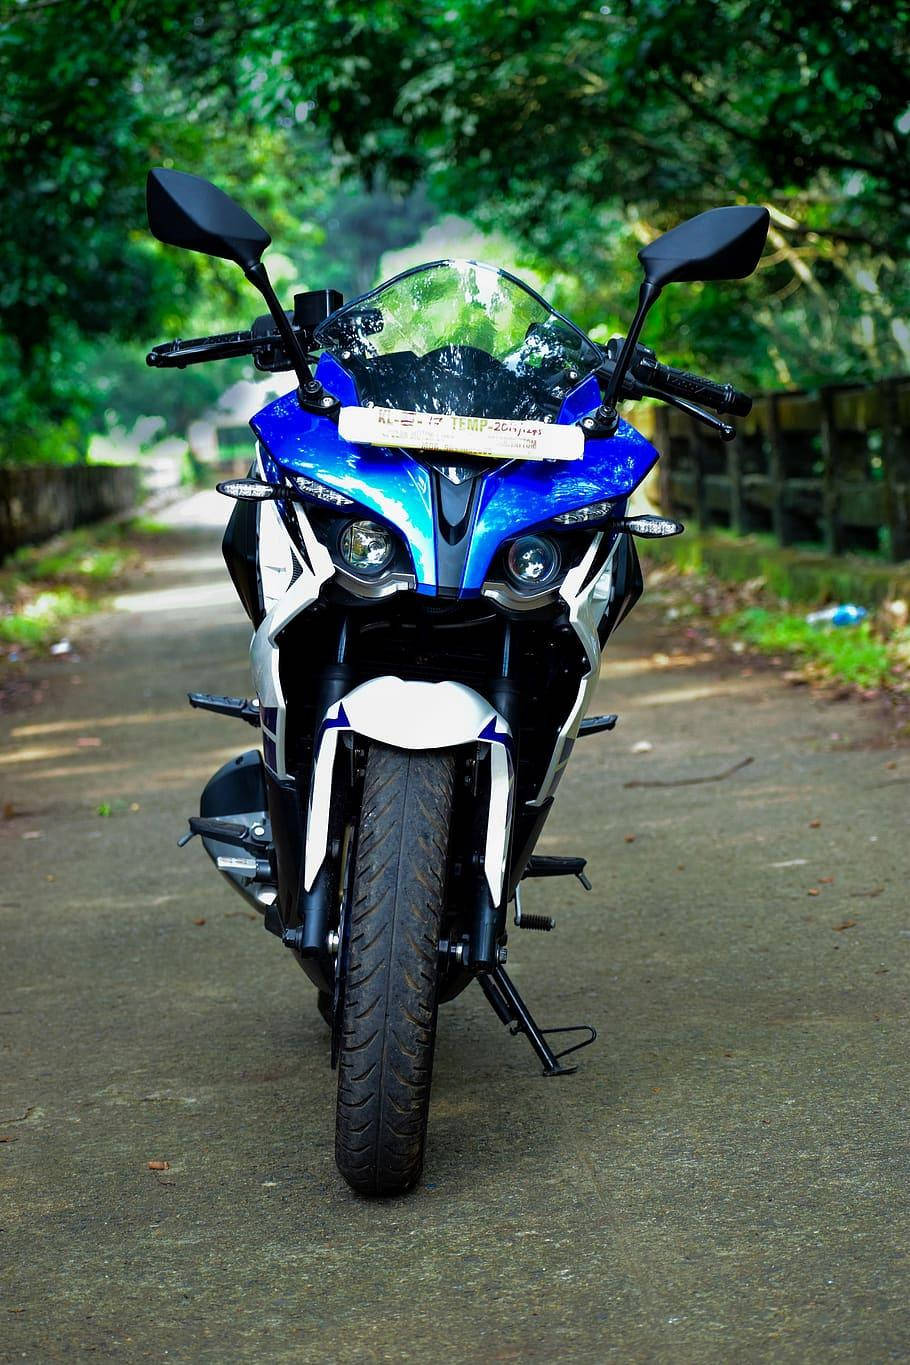 Pristine Blue Ns 200 Motorcycle Captured In High Definition Background